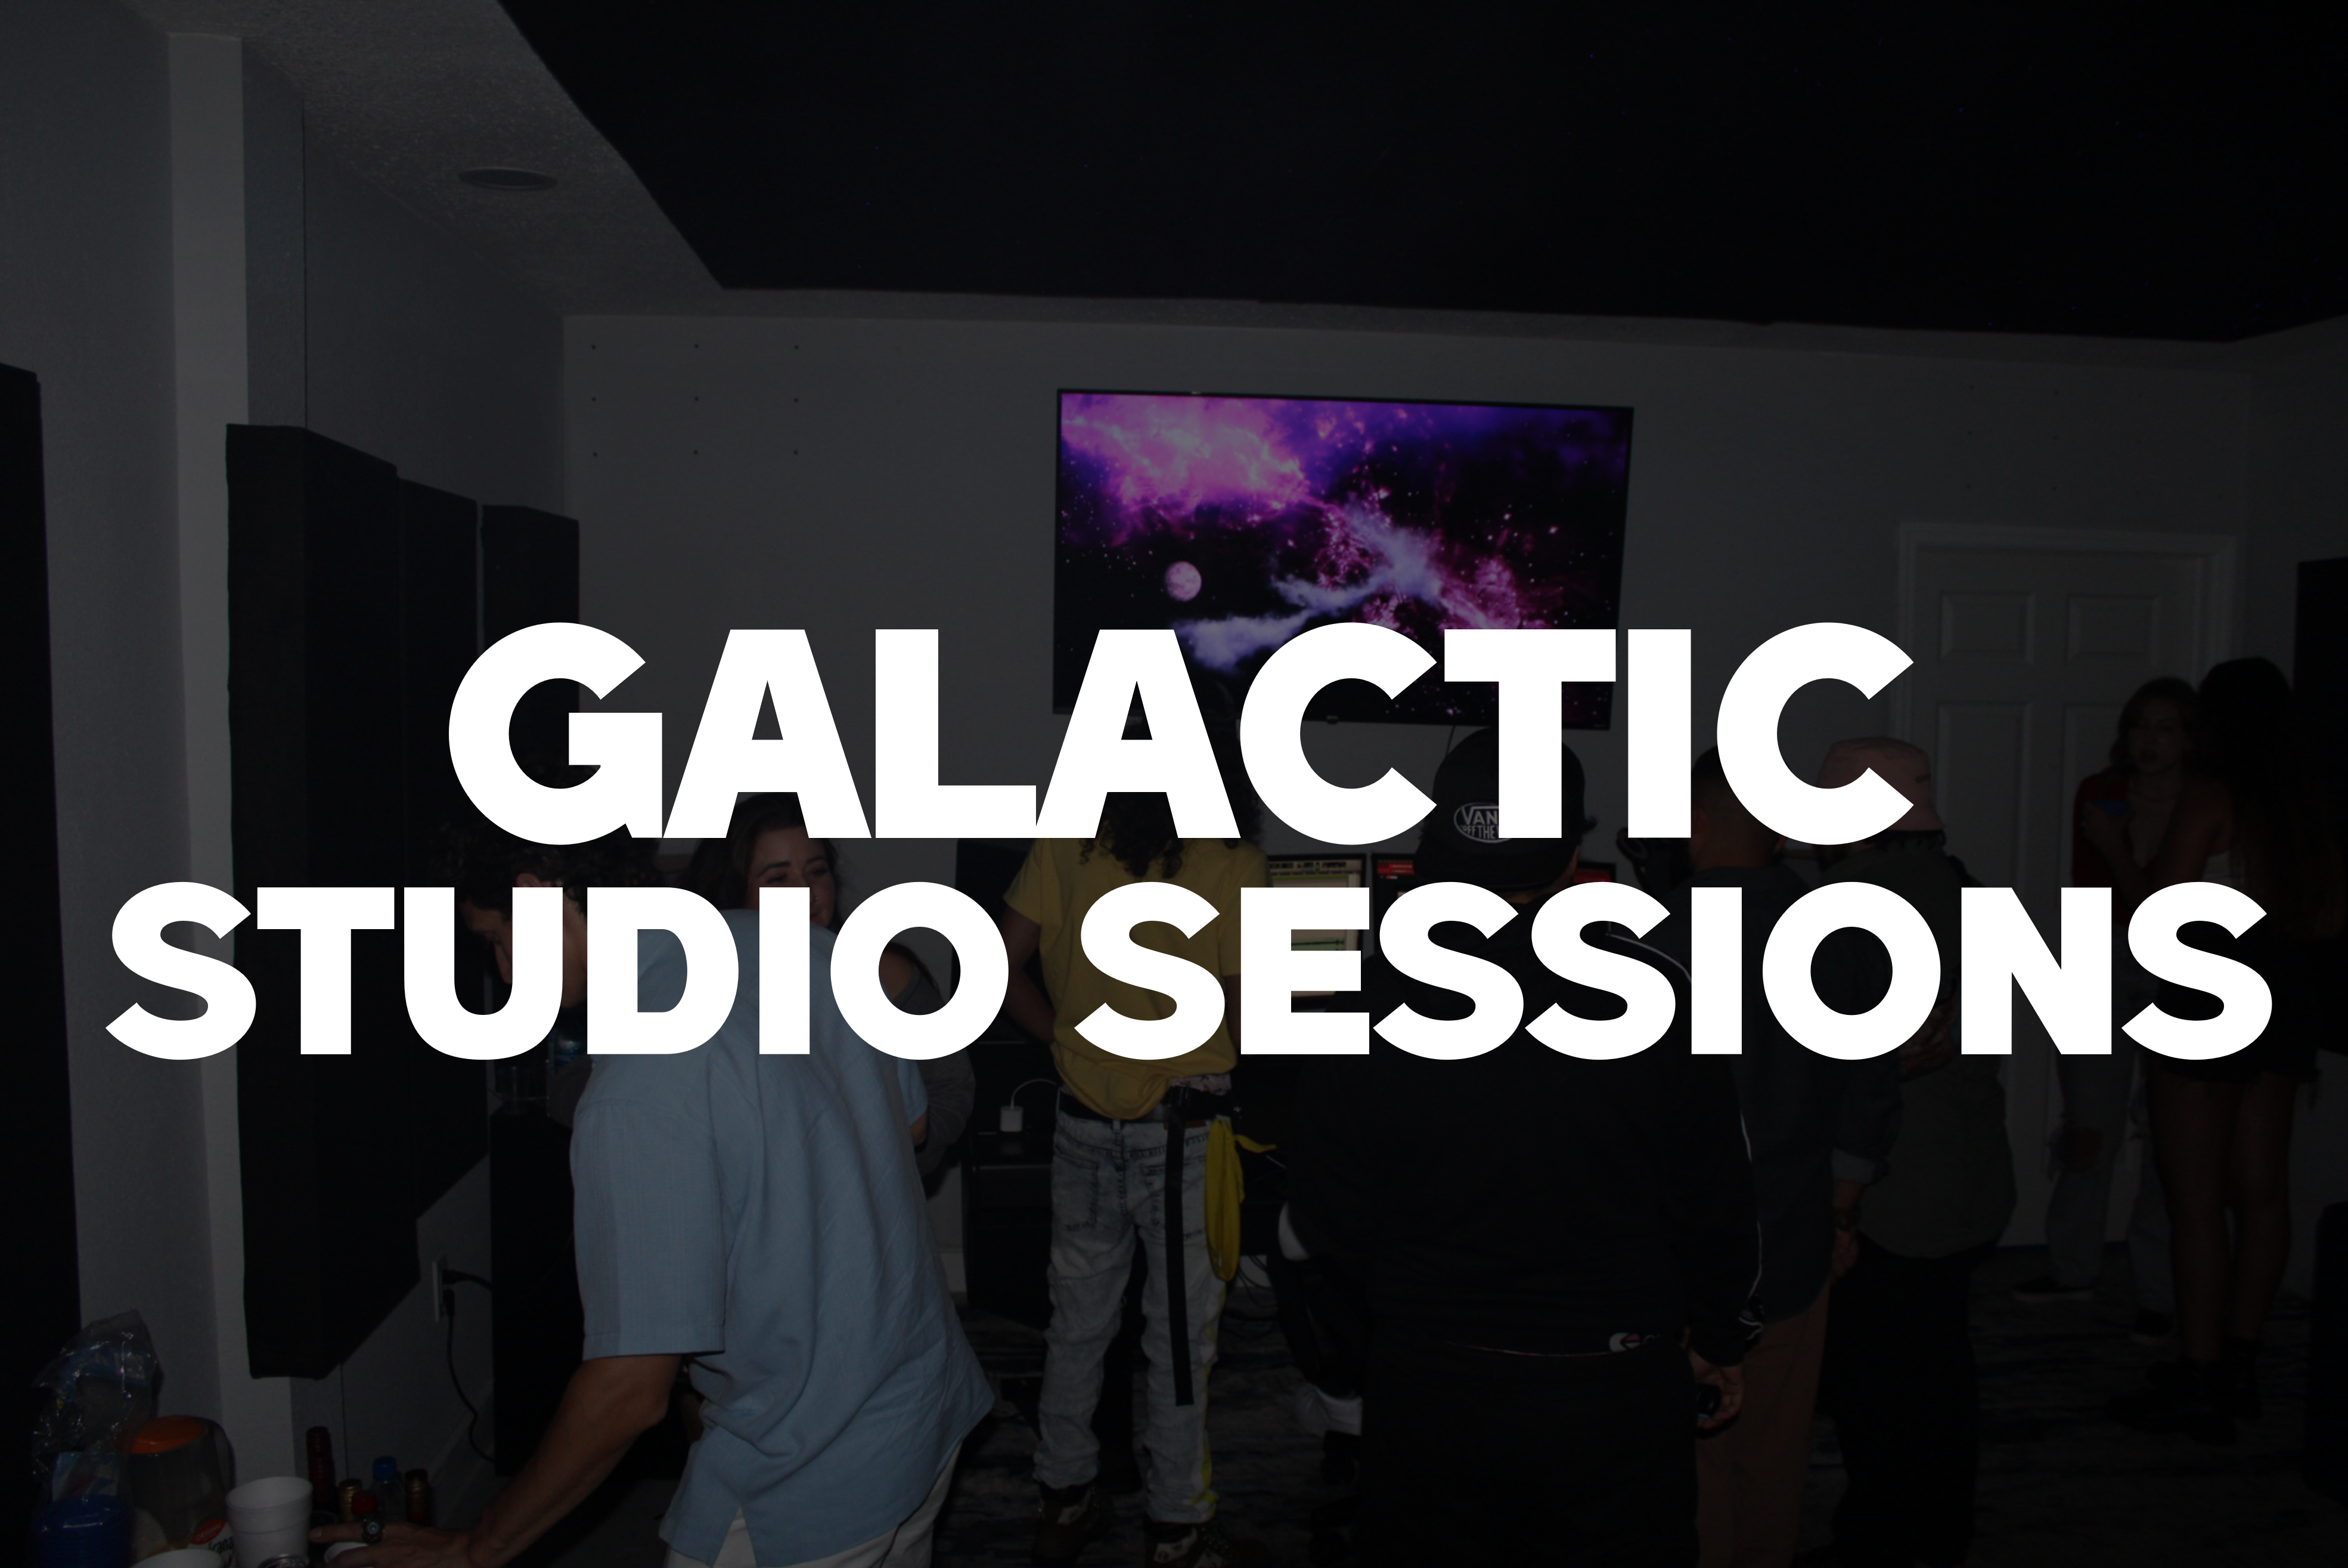 Uvr galactic sessions